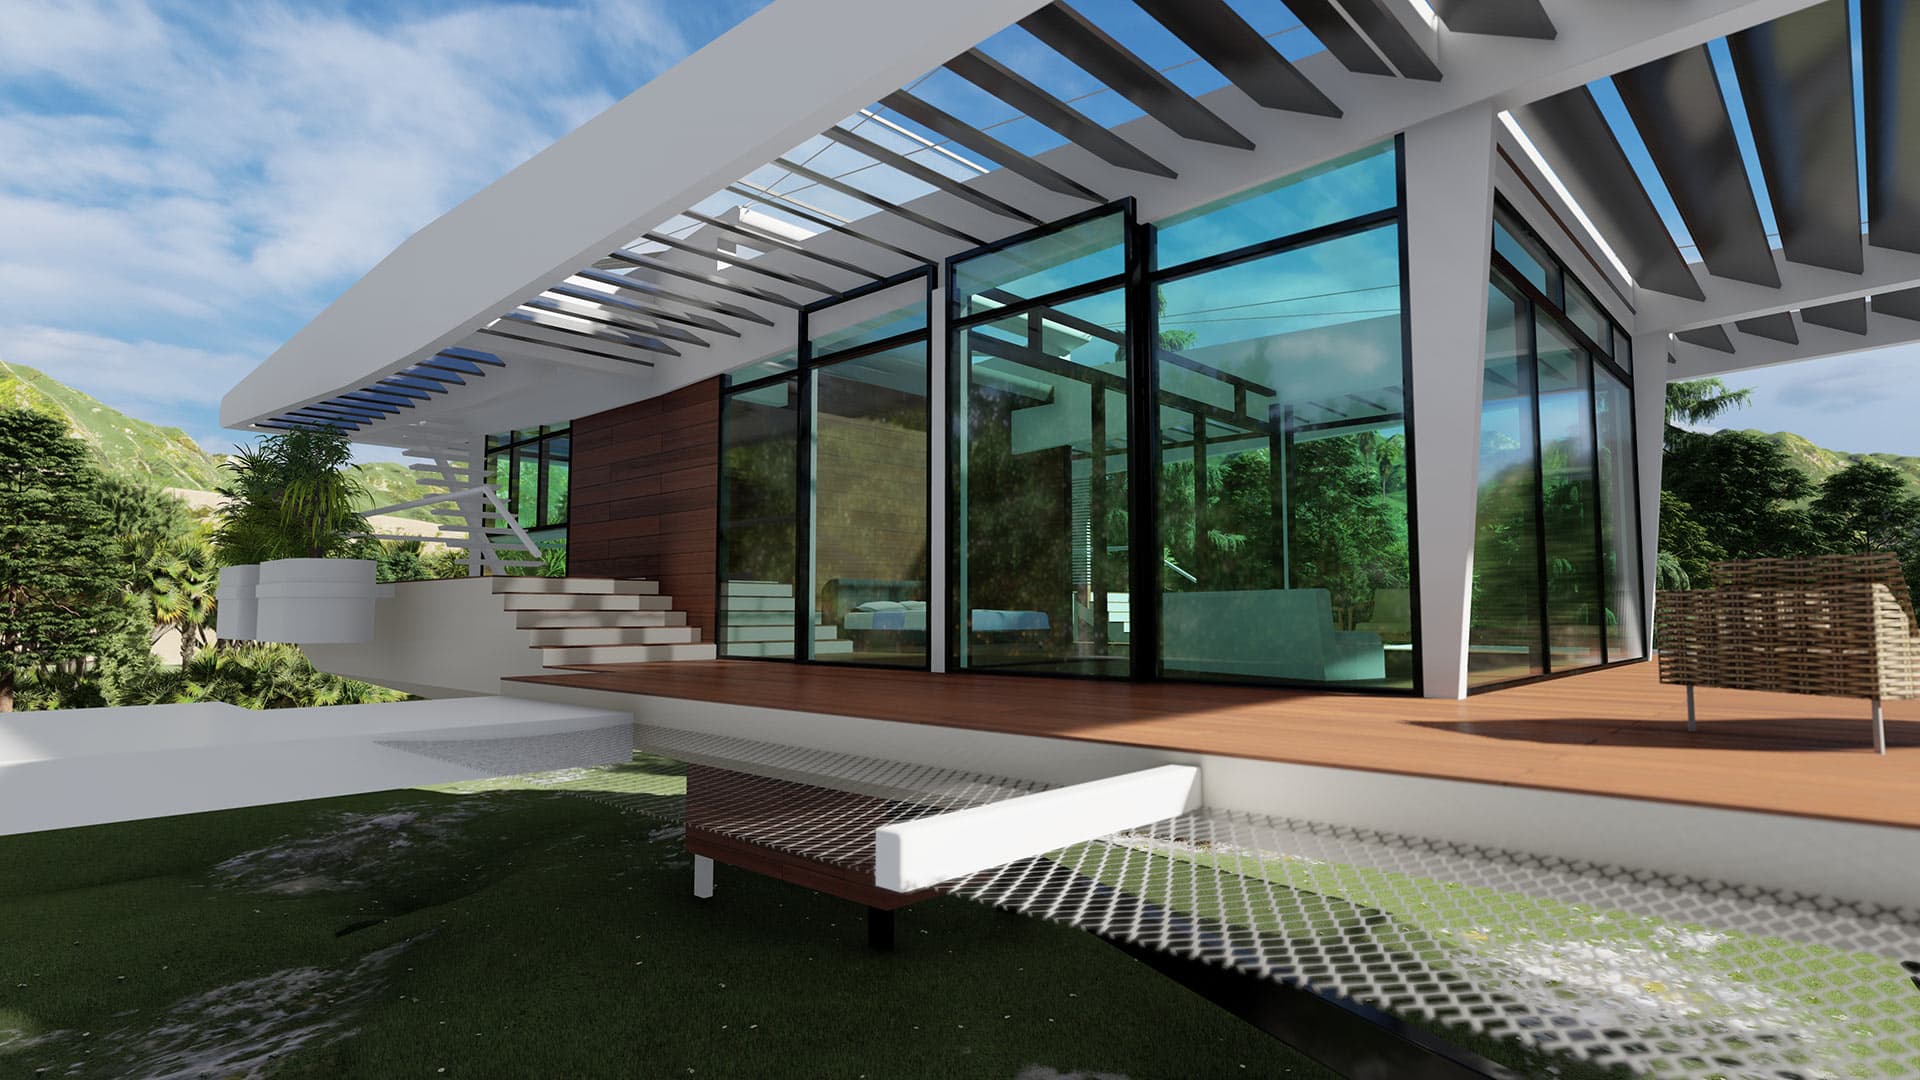 Glass walls create synergy between inner and outer worlds, fully immersing guests in nature.